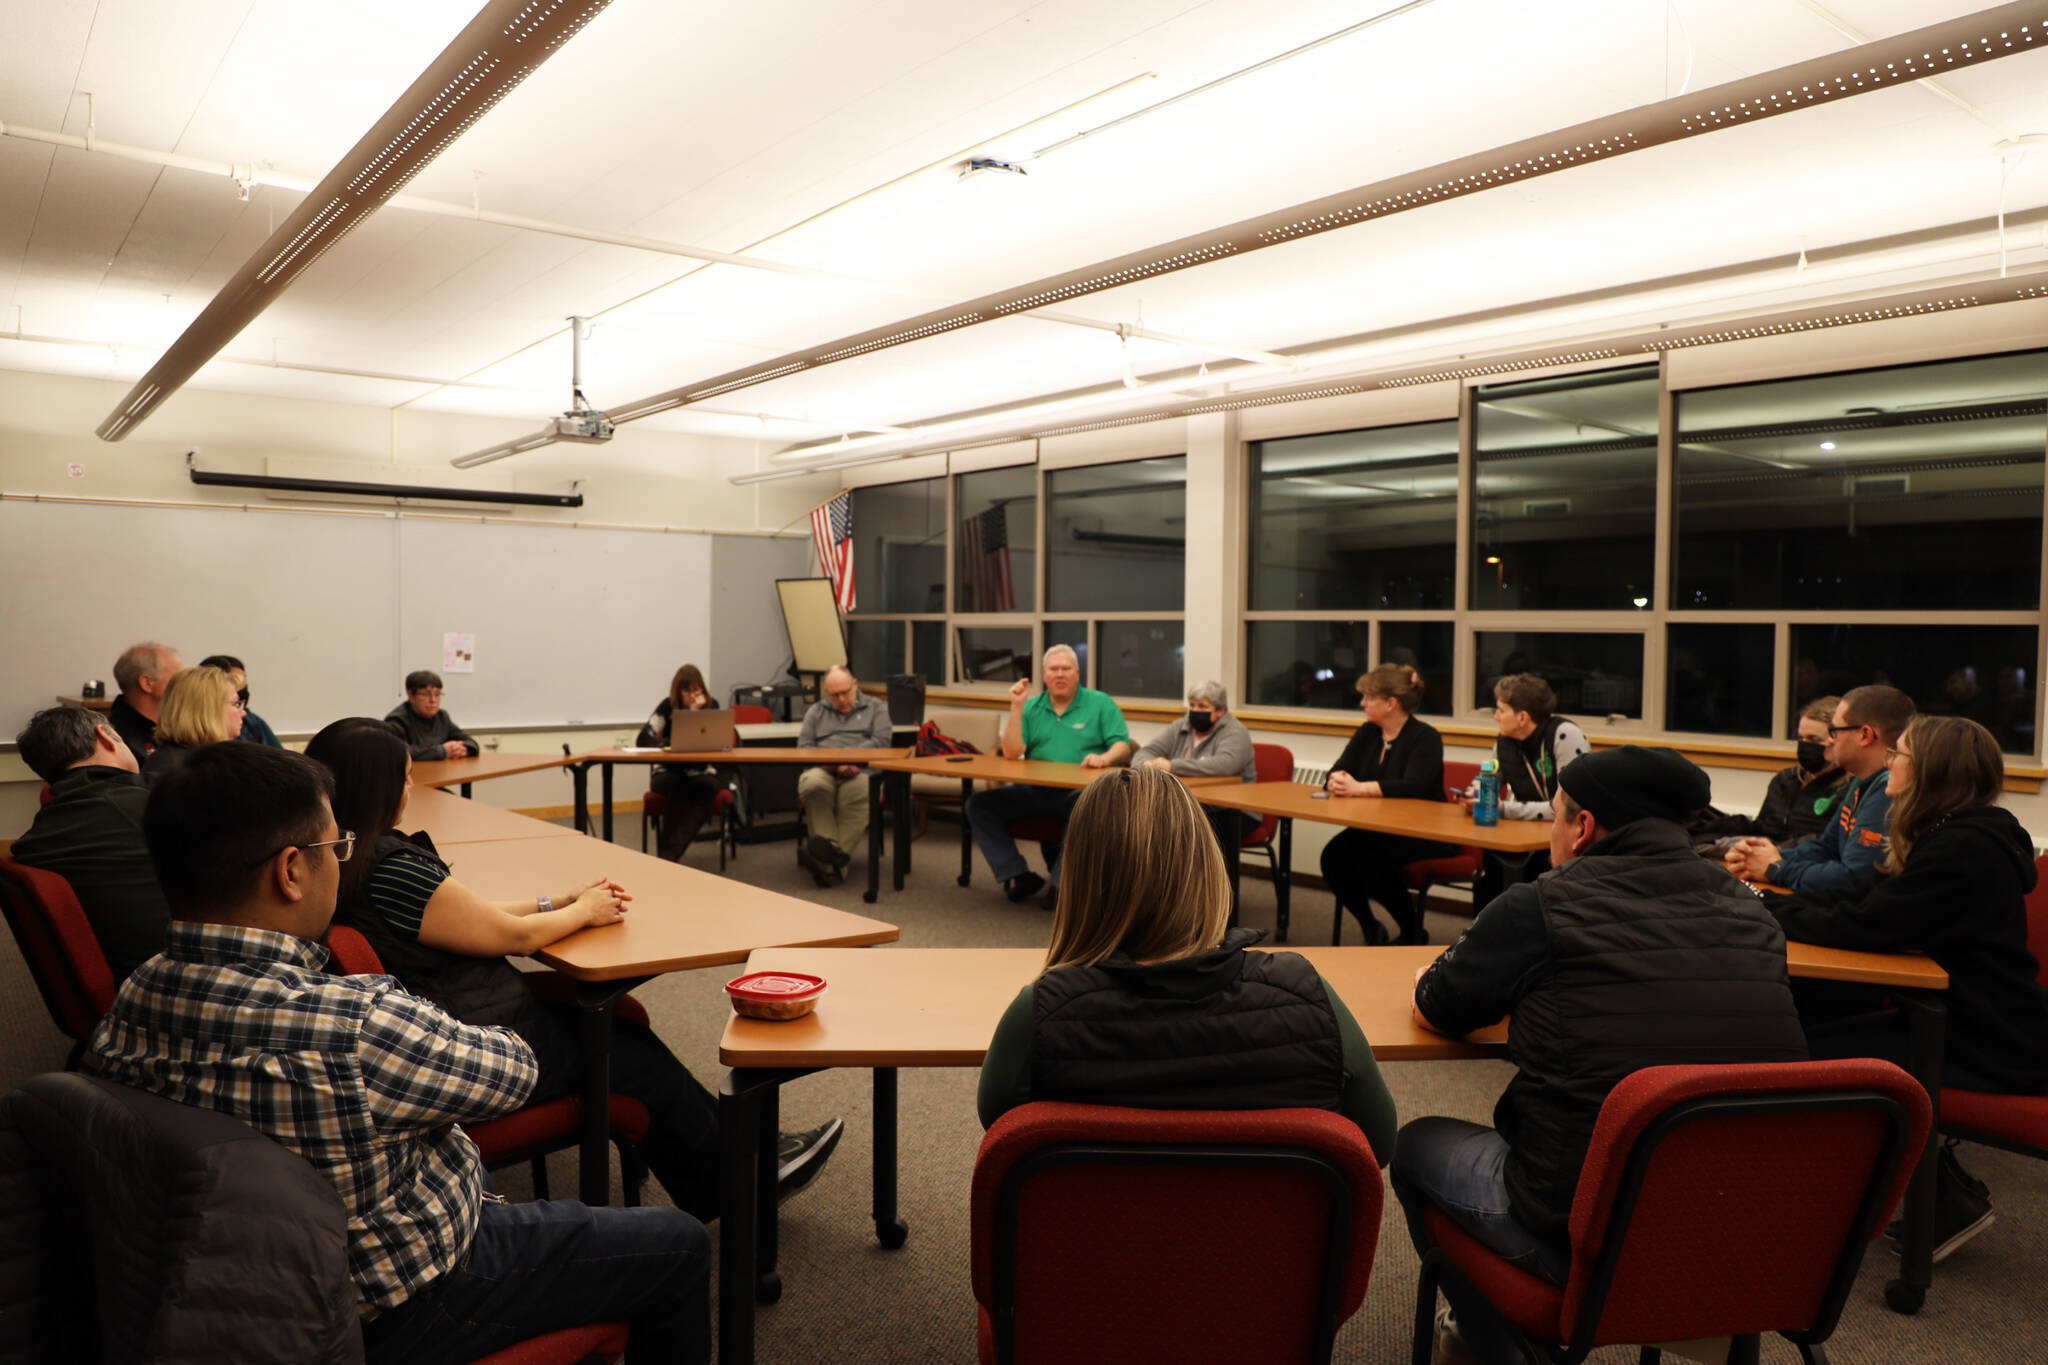 Members of Juneau Board of Education and Juneau Education Association meet to talk at the pair’s annual meet and greet Tuesday night. (Clarise Larson / Juneau Empire)